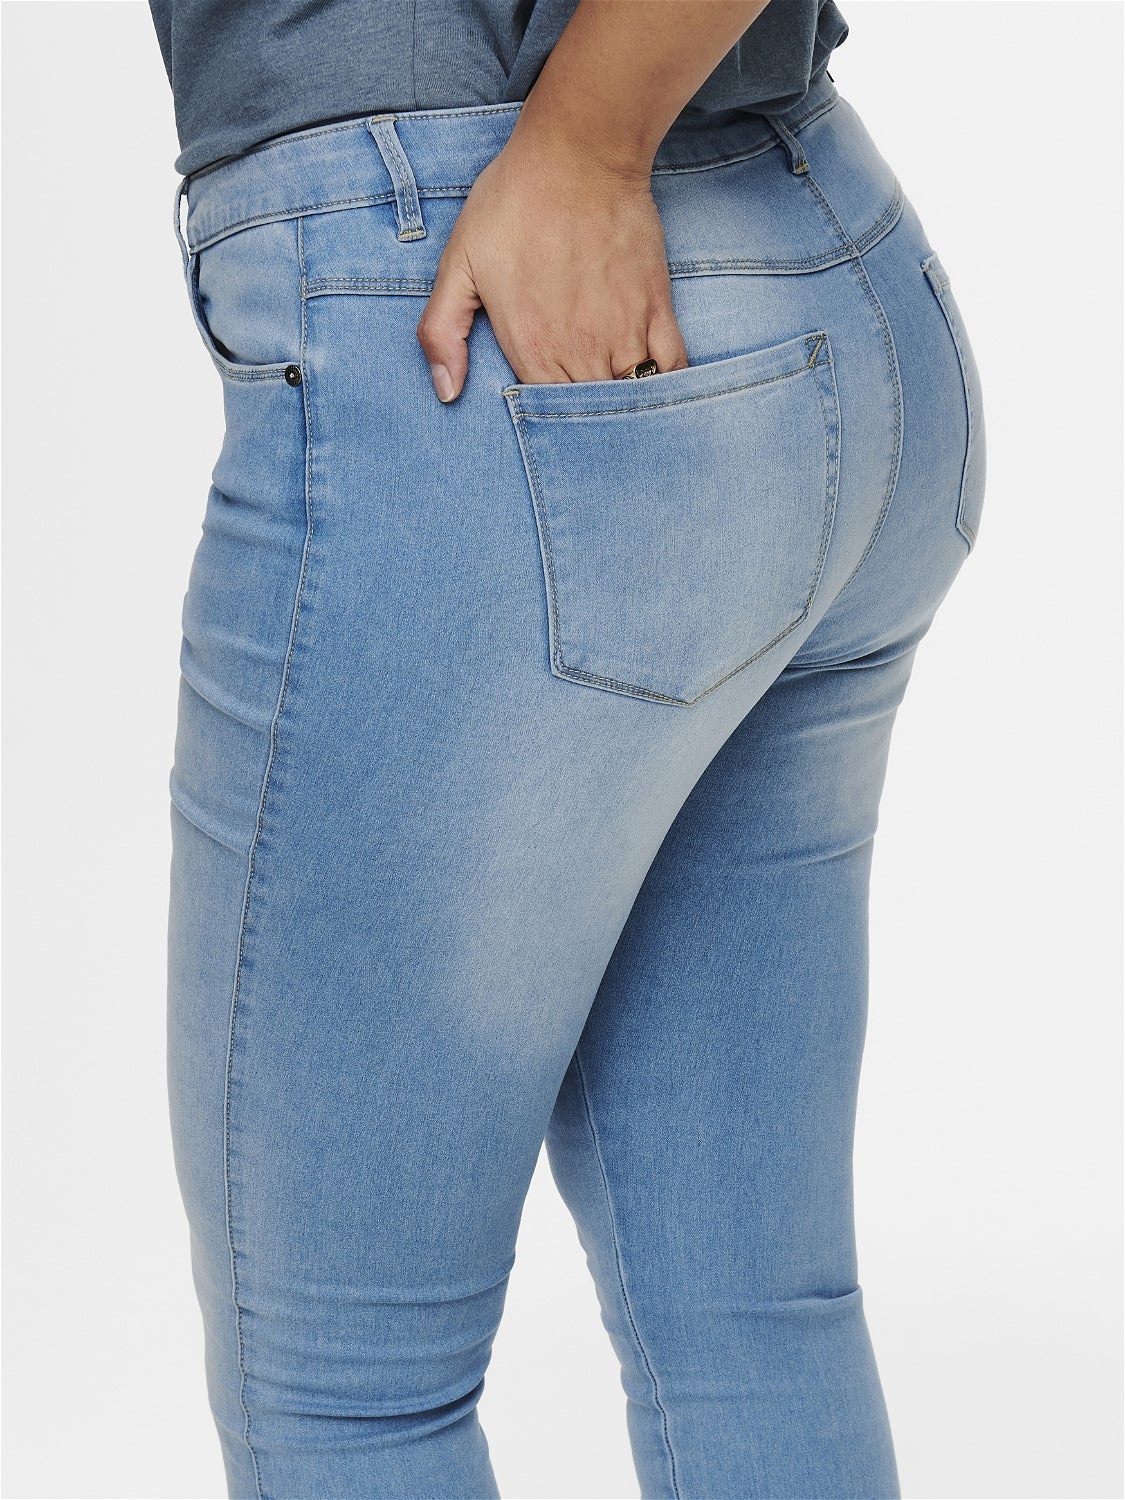 Skinny Blue fit hw jeans | Curvy Light | CarAugusta ONLY®